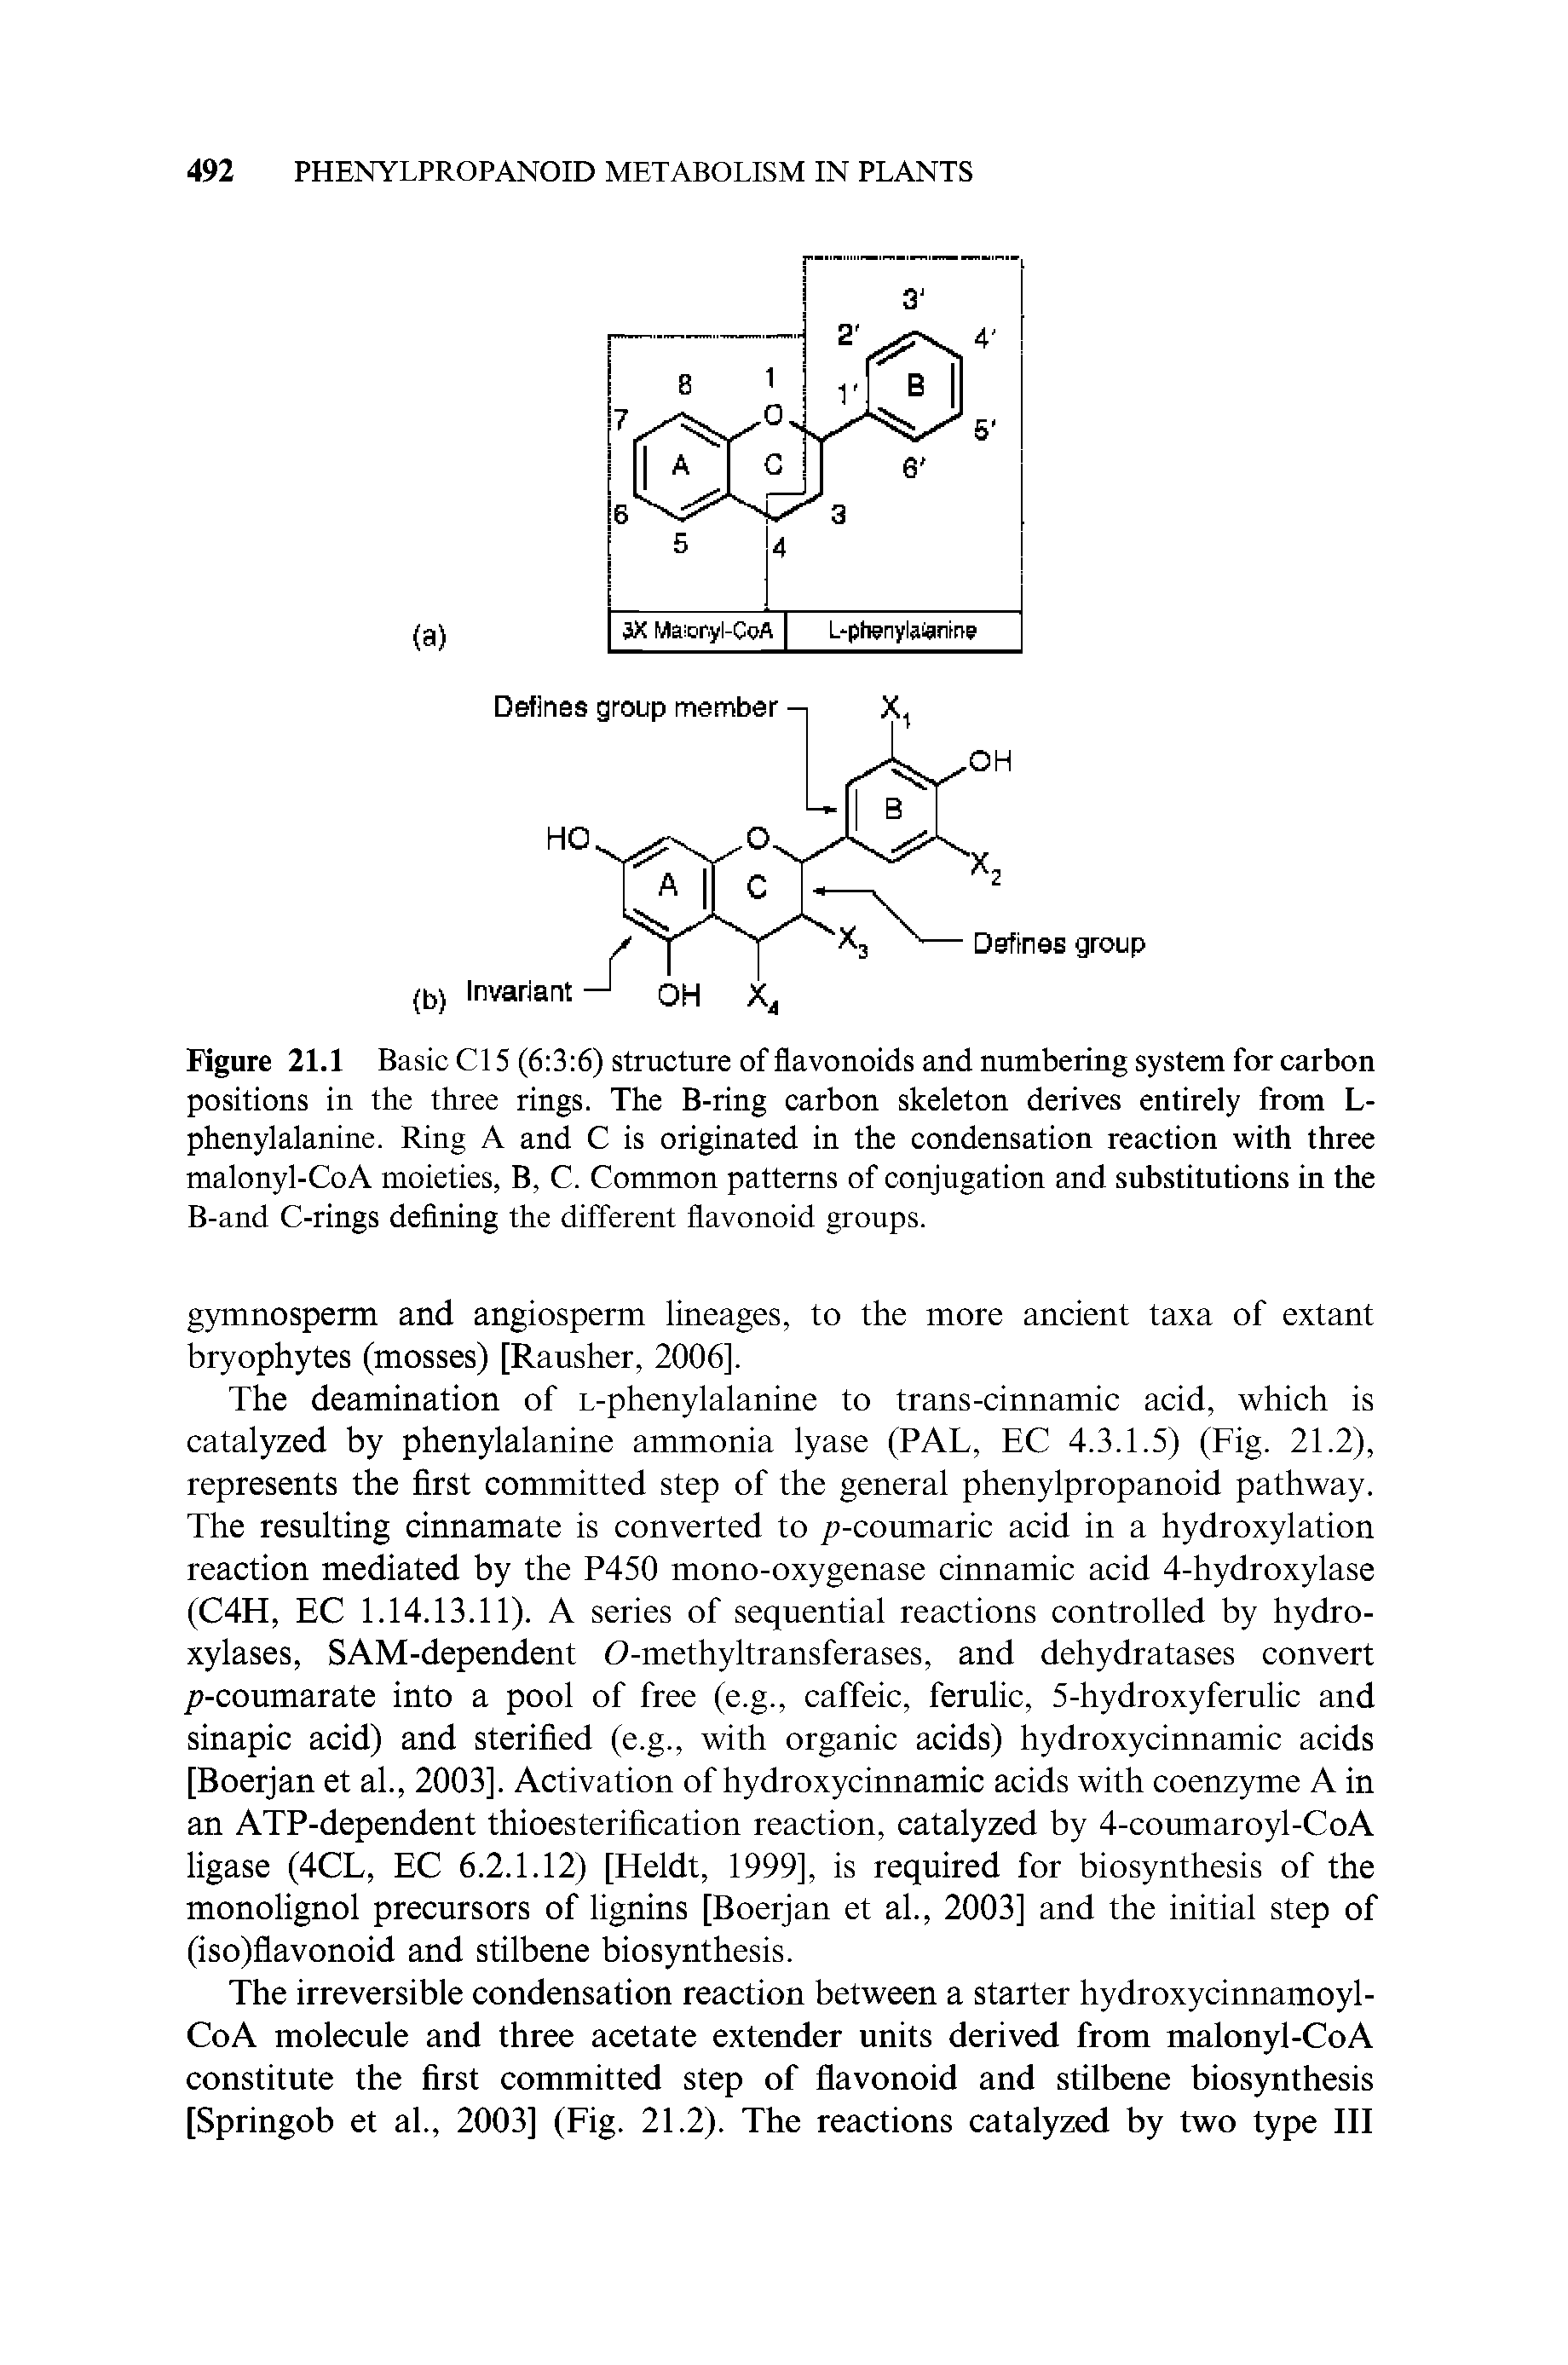 Figure 21.1 Basic Cl 5 (6 3 6) structure of flavonoids and numbering system for carbon positions in the three rings. The B-ring carbon skeleton derives entirely from L-phenylalanine. Ring A and C is originated in the condensation reaction with three malonyl-CoA moieties, B, C. Common patterns of conjugation and substitutions in the B-and C-rings defining the different flavonoid groups.